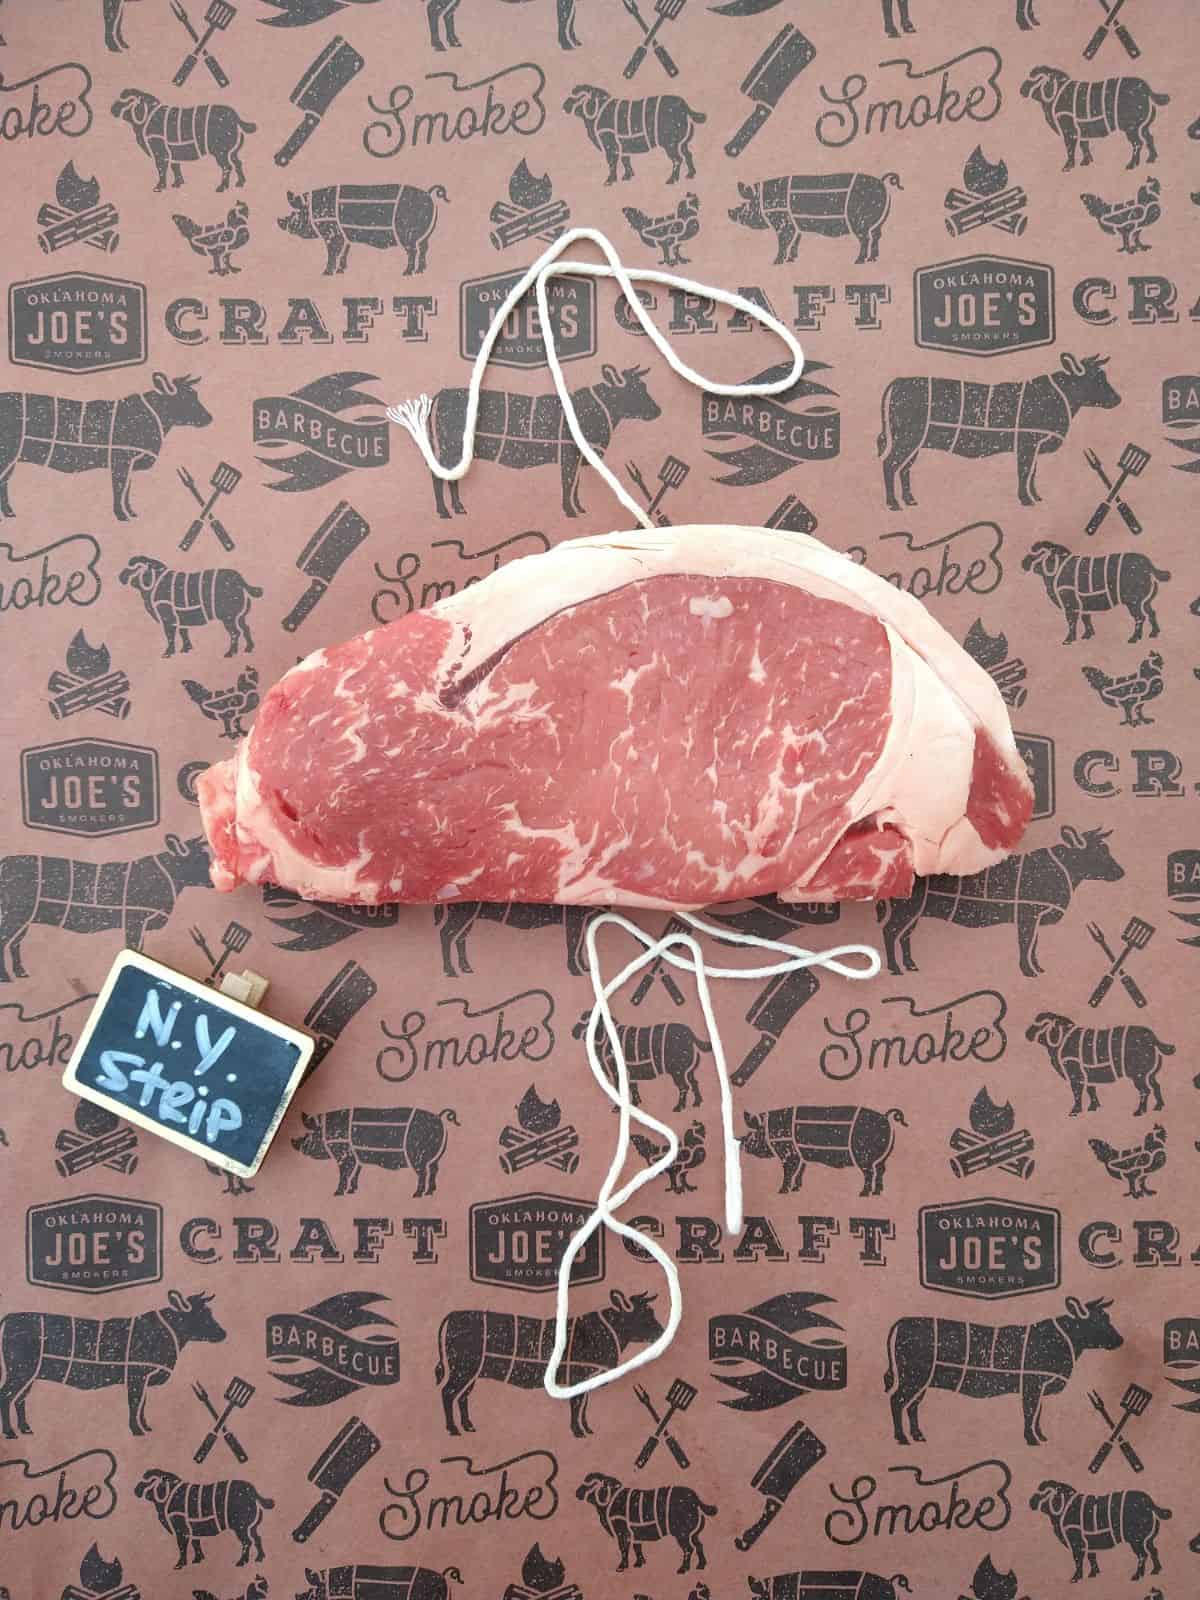 A raw NY Strip steak with a layer of fat on top, sitting on a piece of butcher paper and string. A small sign next to the steak says "N.Y. Strip".